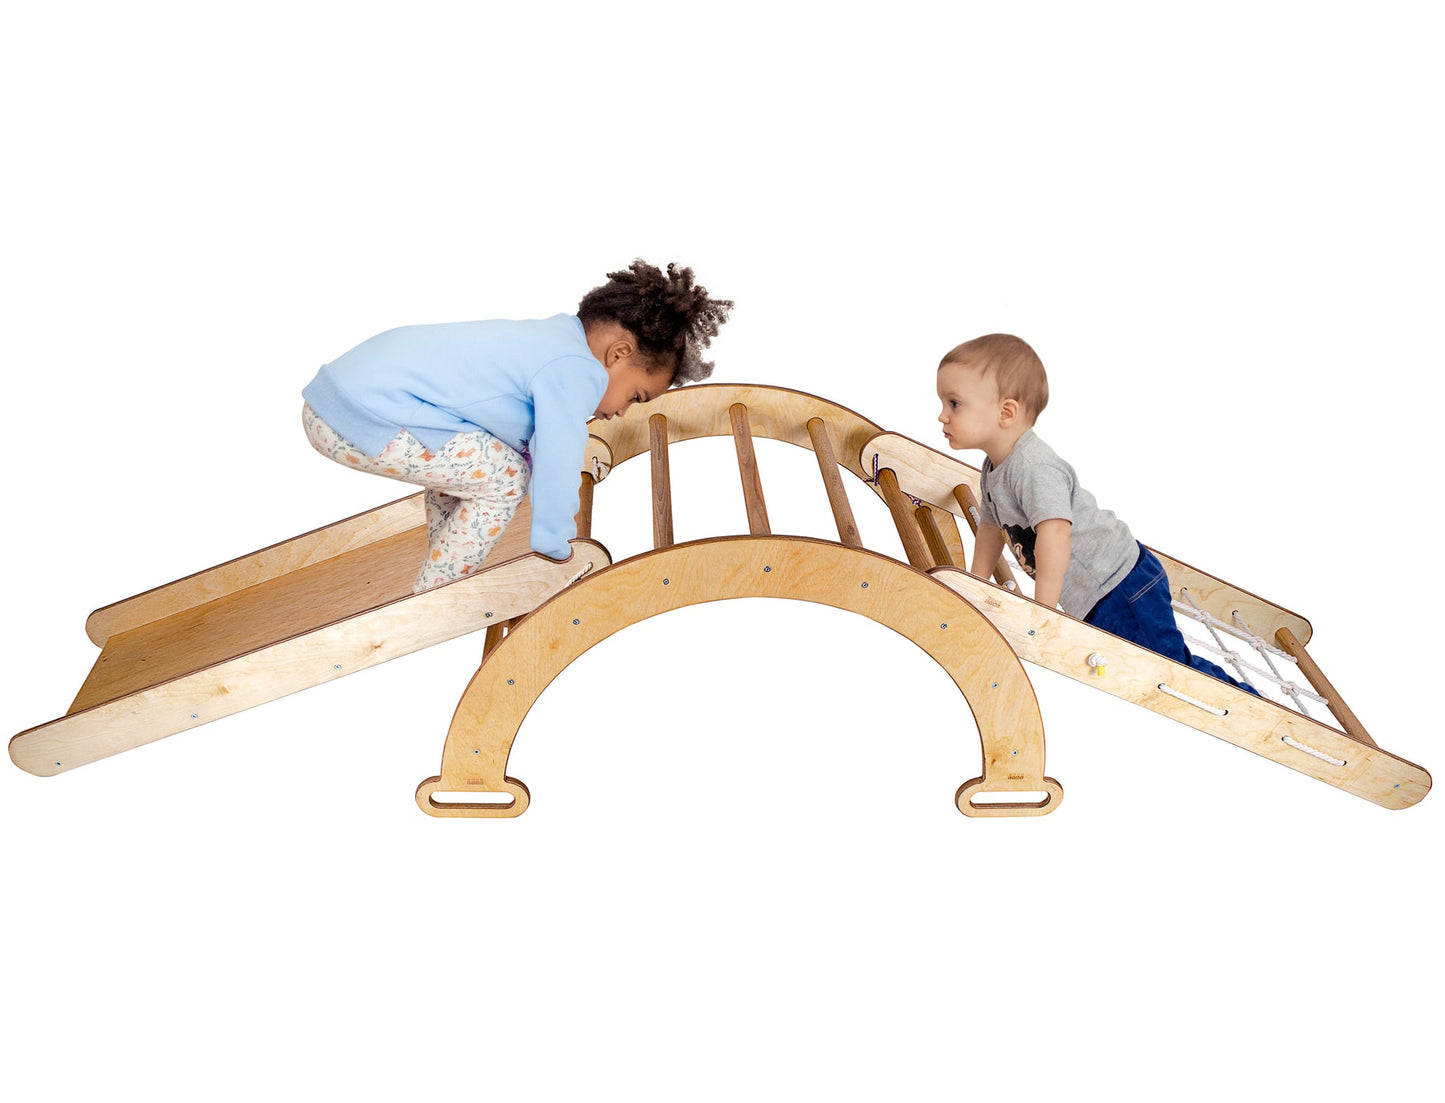 Arch set with ramp slide and climbing net